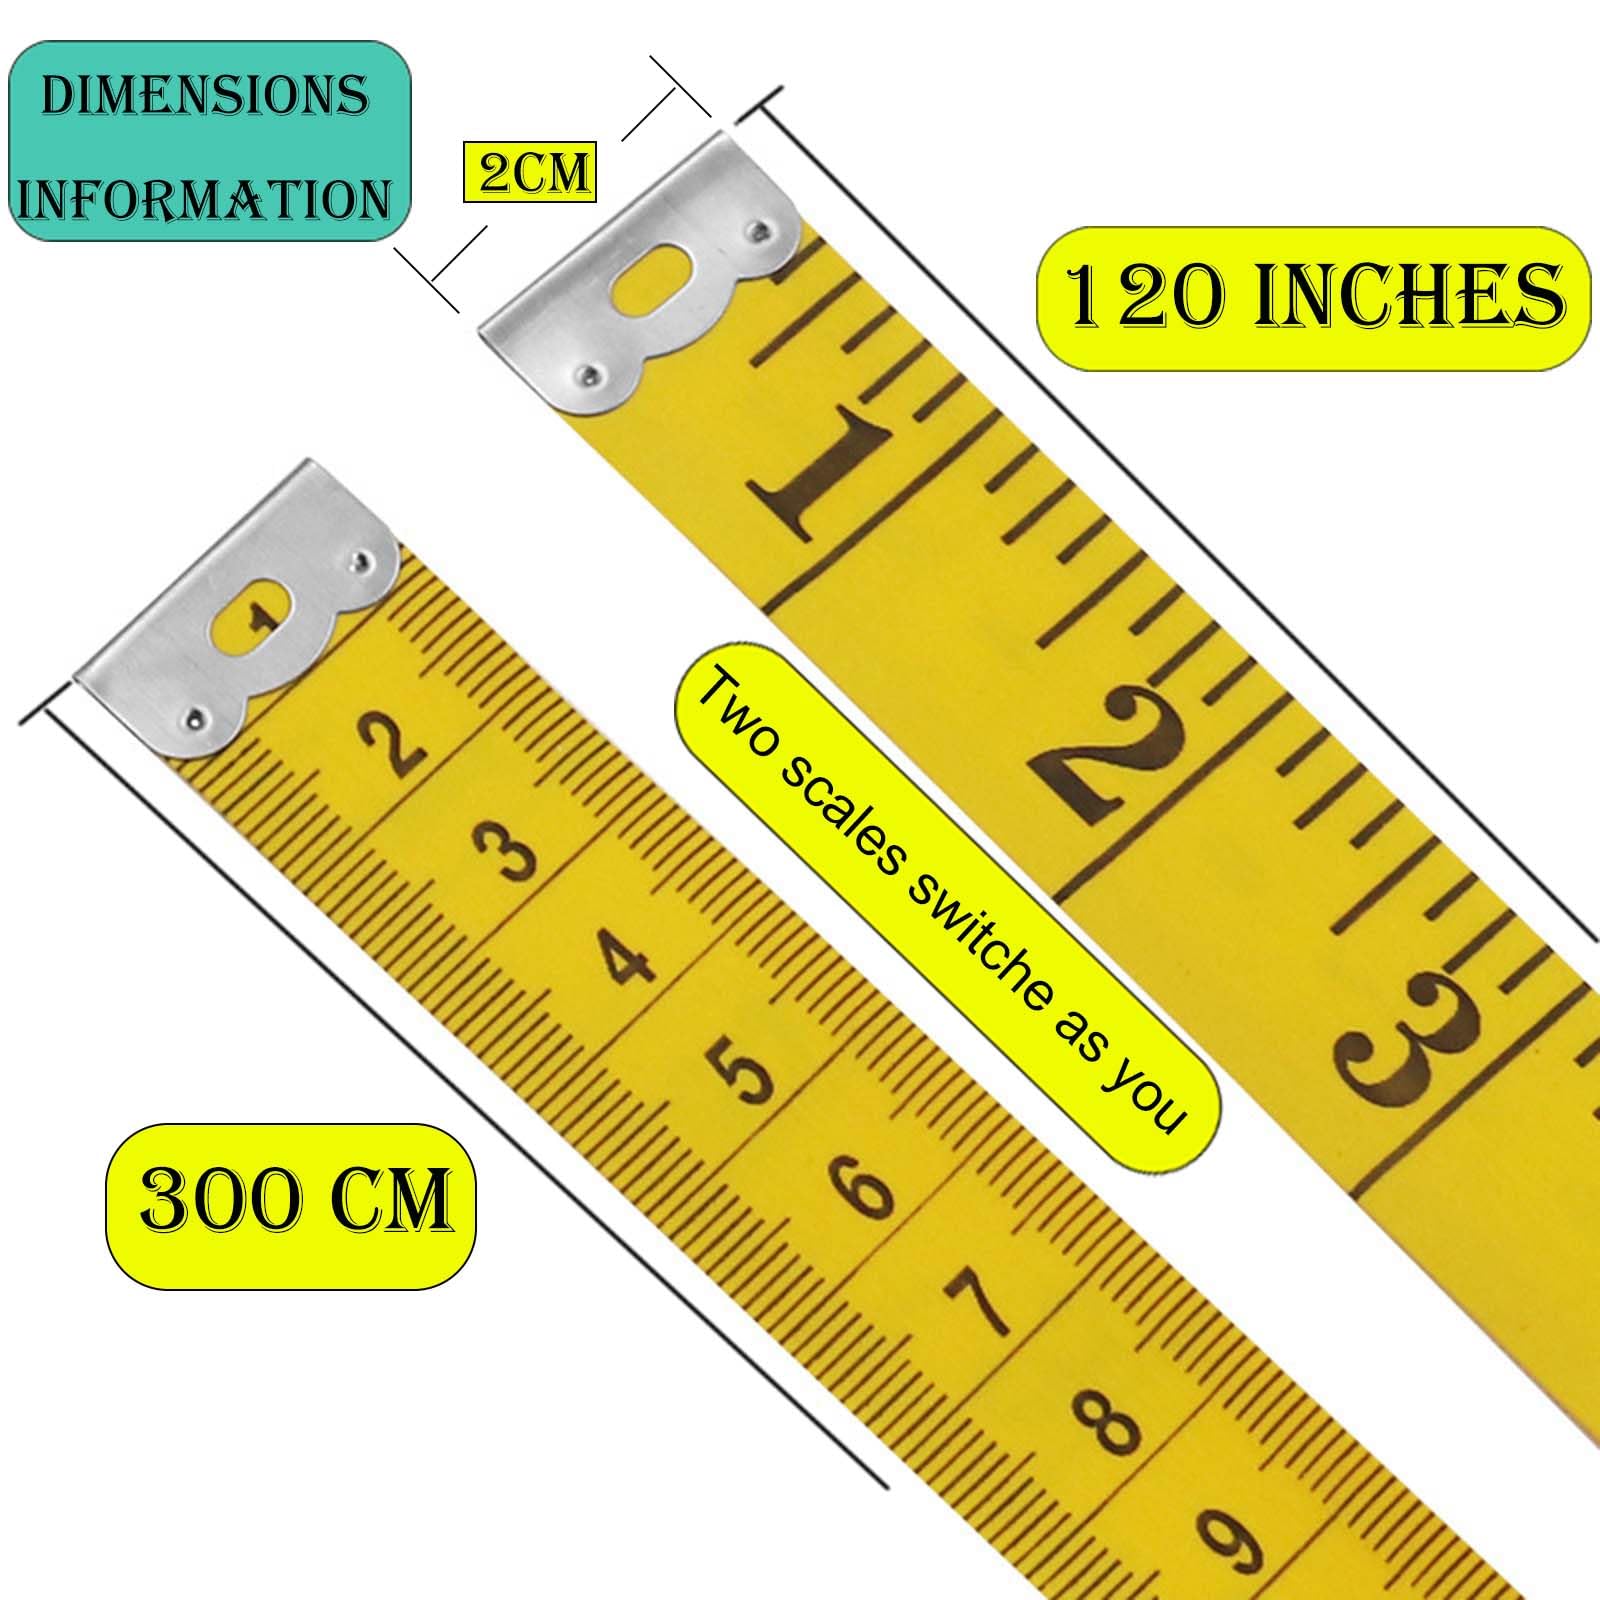 Oboteny 2Pcs Tape Measure Measuring Tape for Body, 120-Inch Double Scale Sewing Flexible Ruler for Weight Loss Body Measurement Tailor Craft Vinyl Body Measurement Tape(White, Yellow)